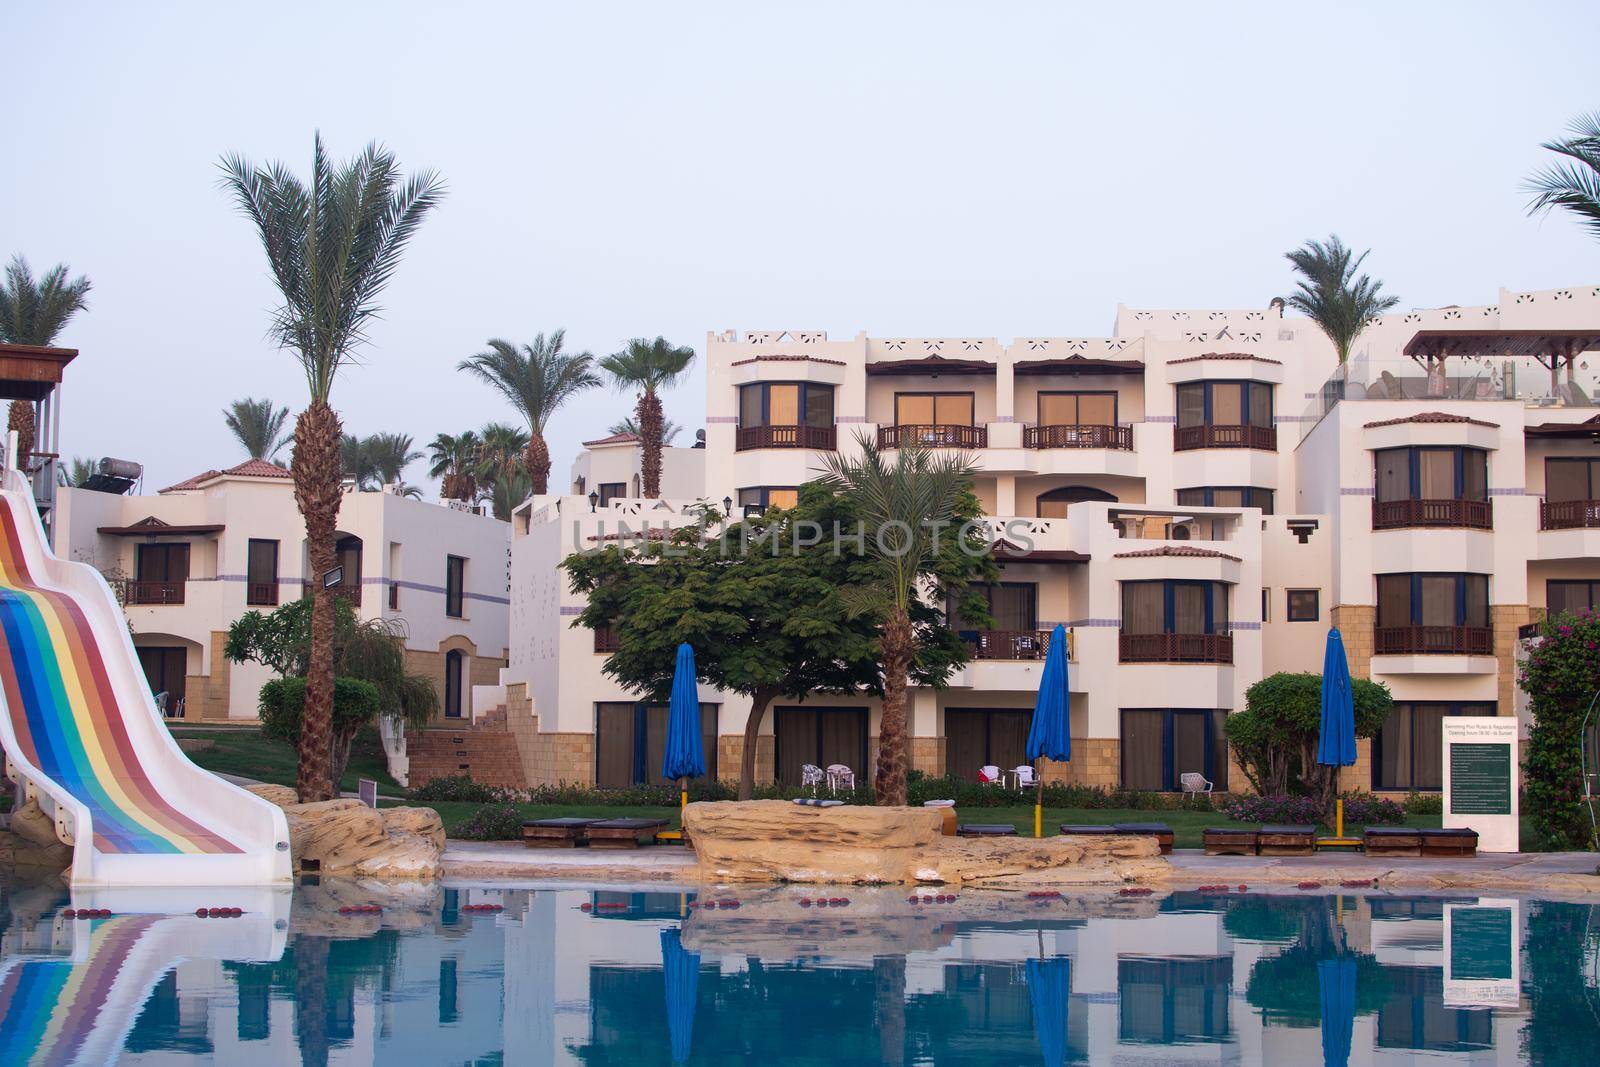 vacation in a hotel in Egypt, Sharm el-Sheikh. view of the pool and residential areas.